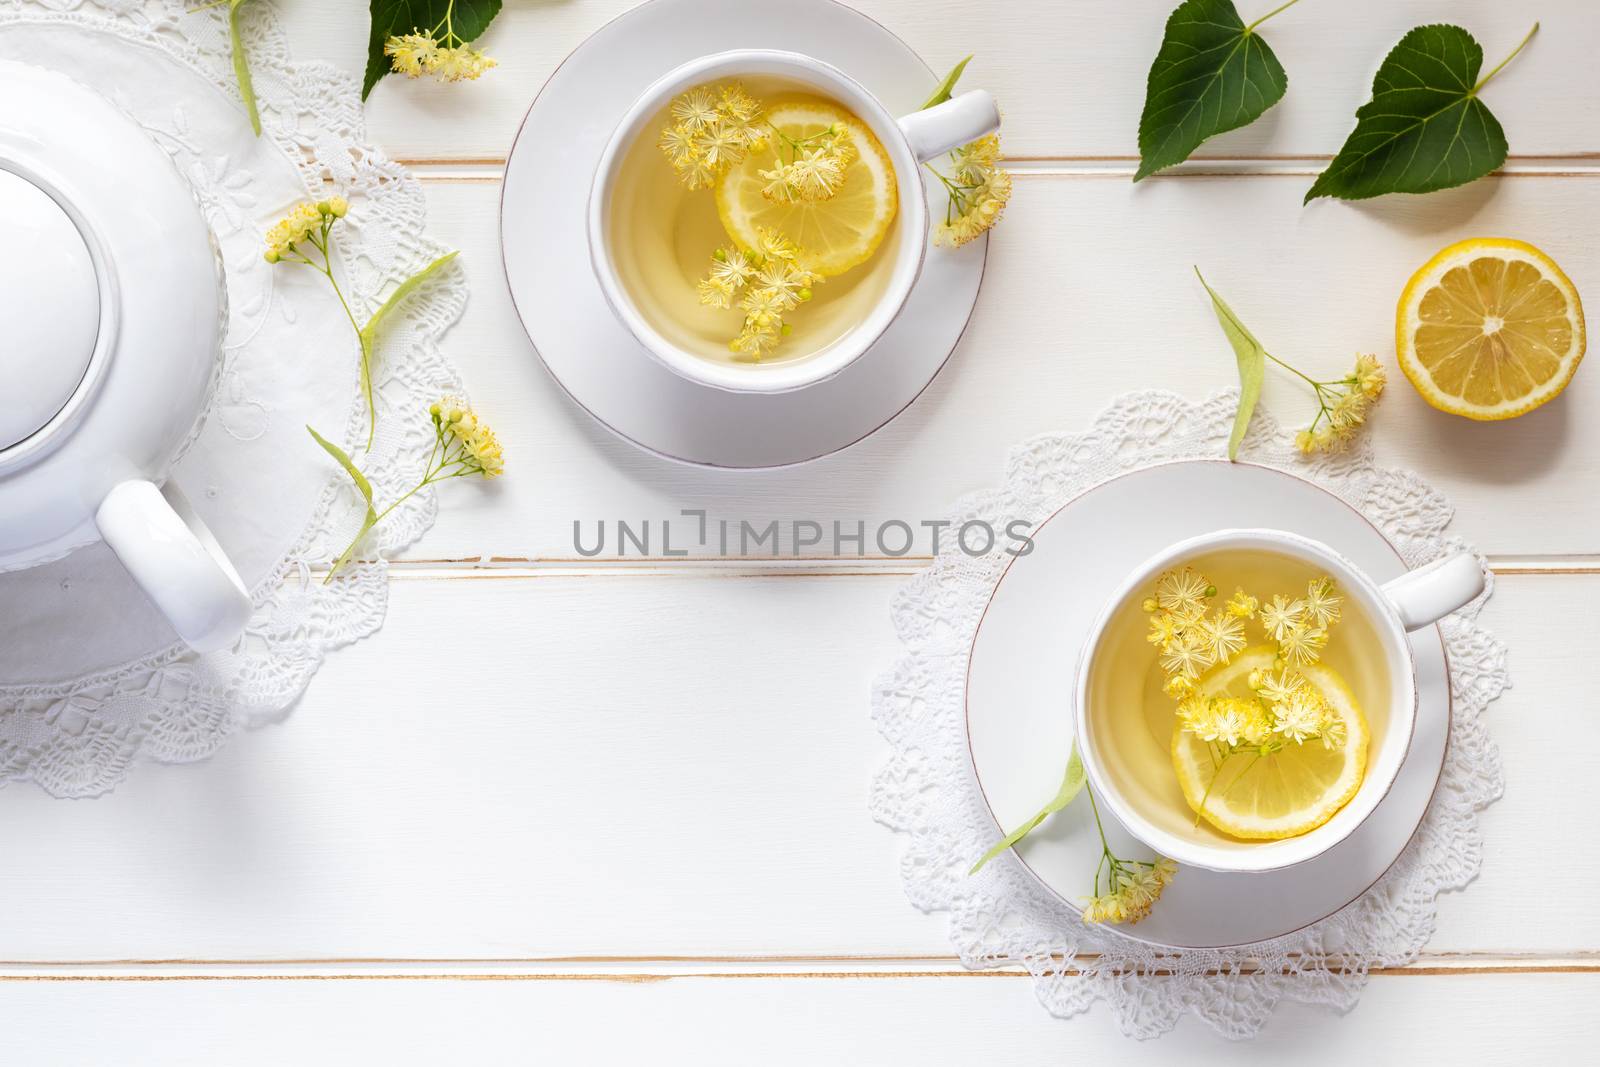 Two cups of herbal tea with linden flowers and lemon on a white table, with copy space